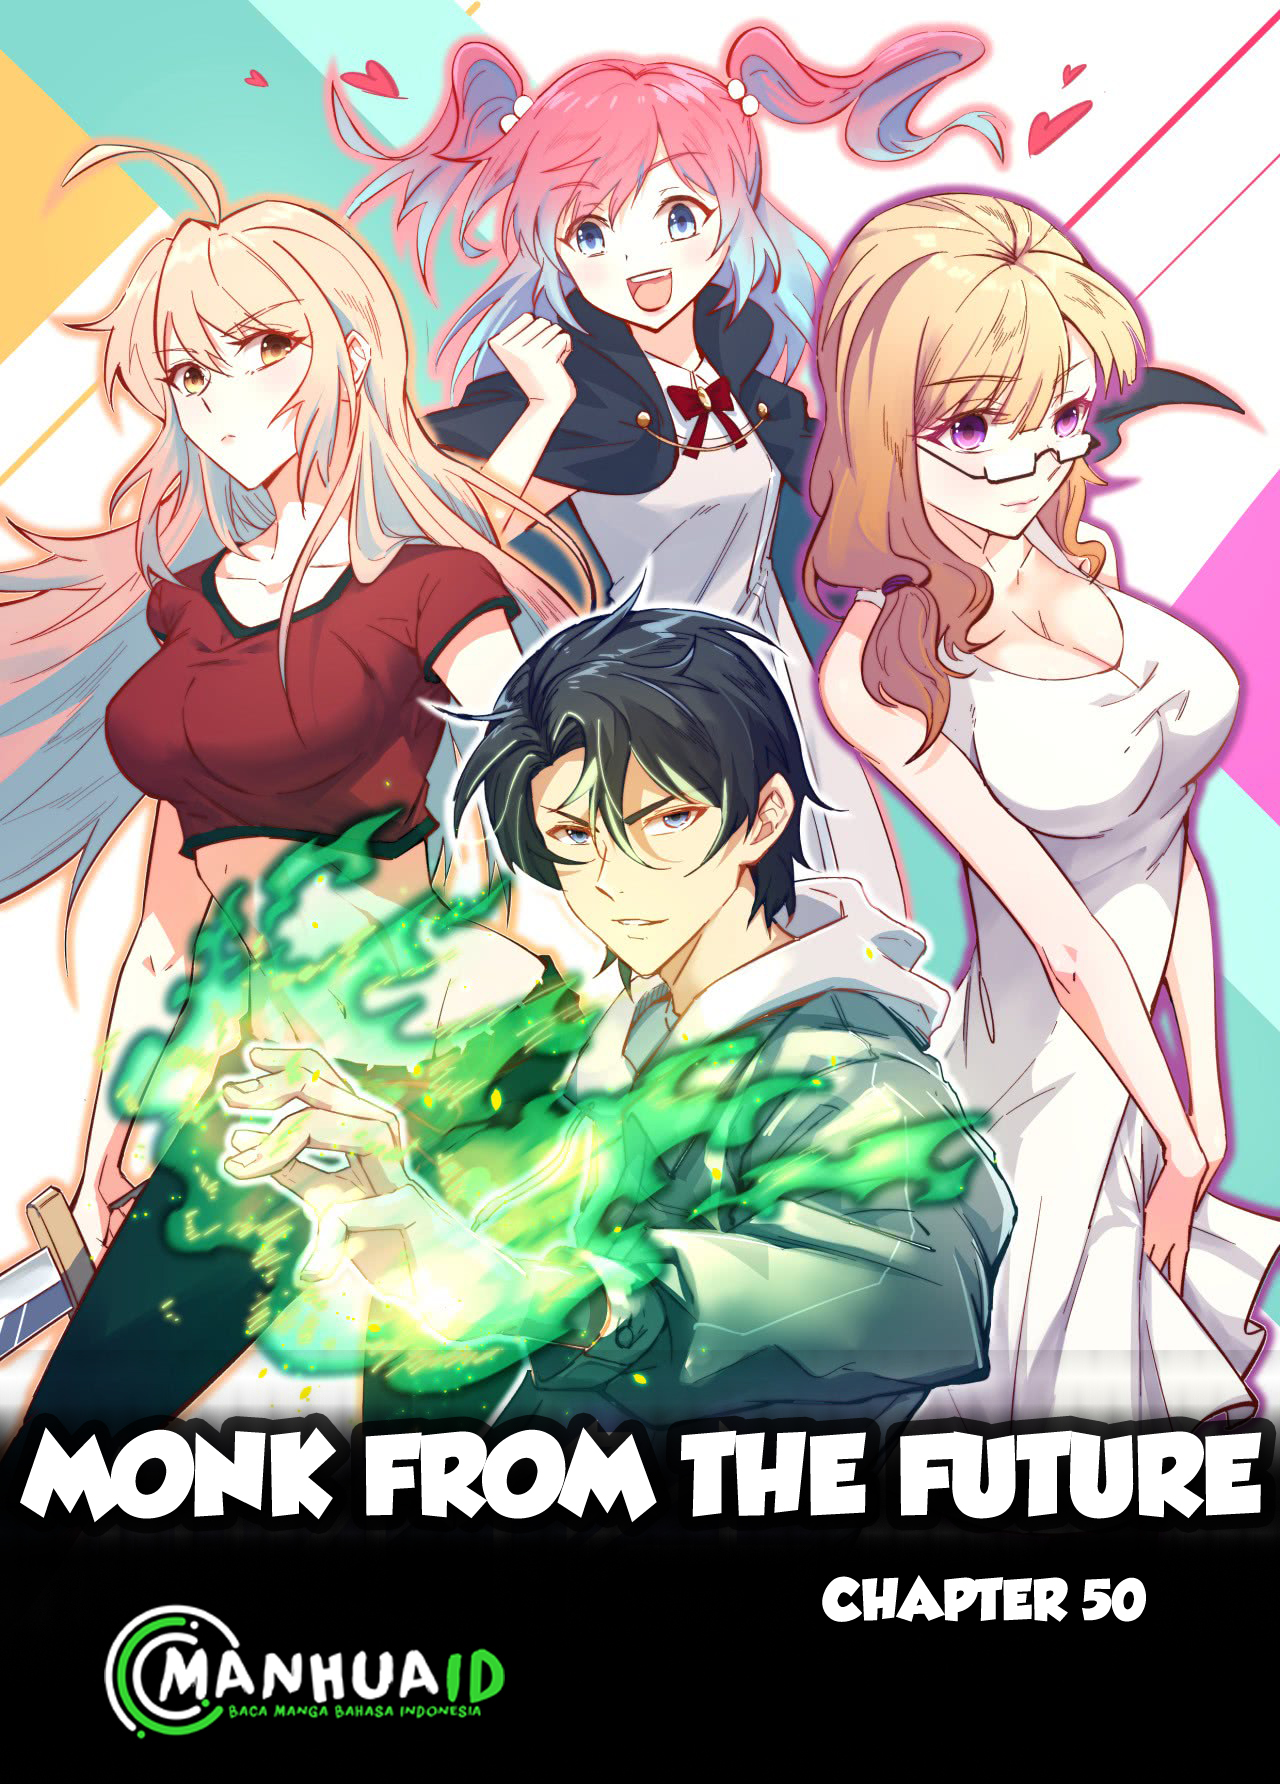 Monk From the Future Chapter 50